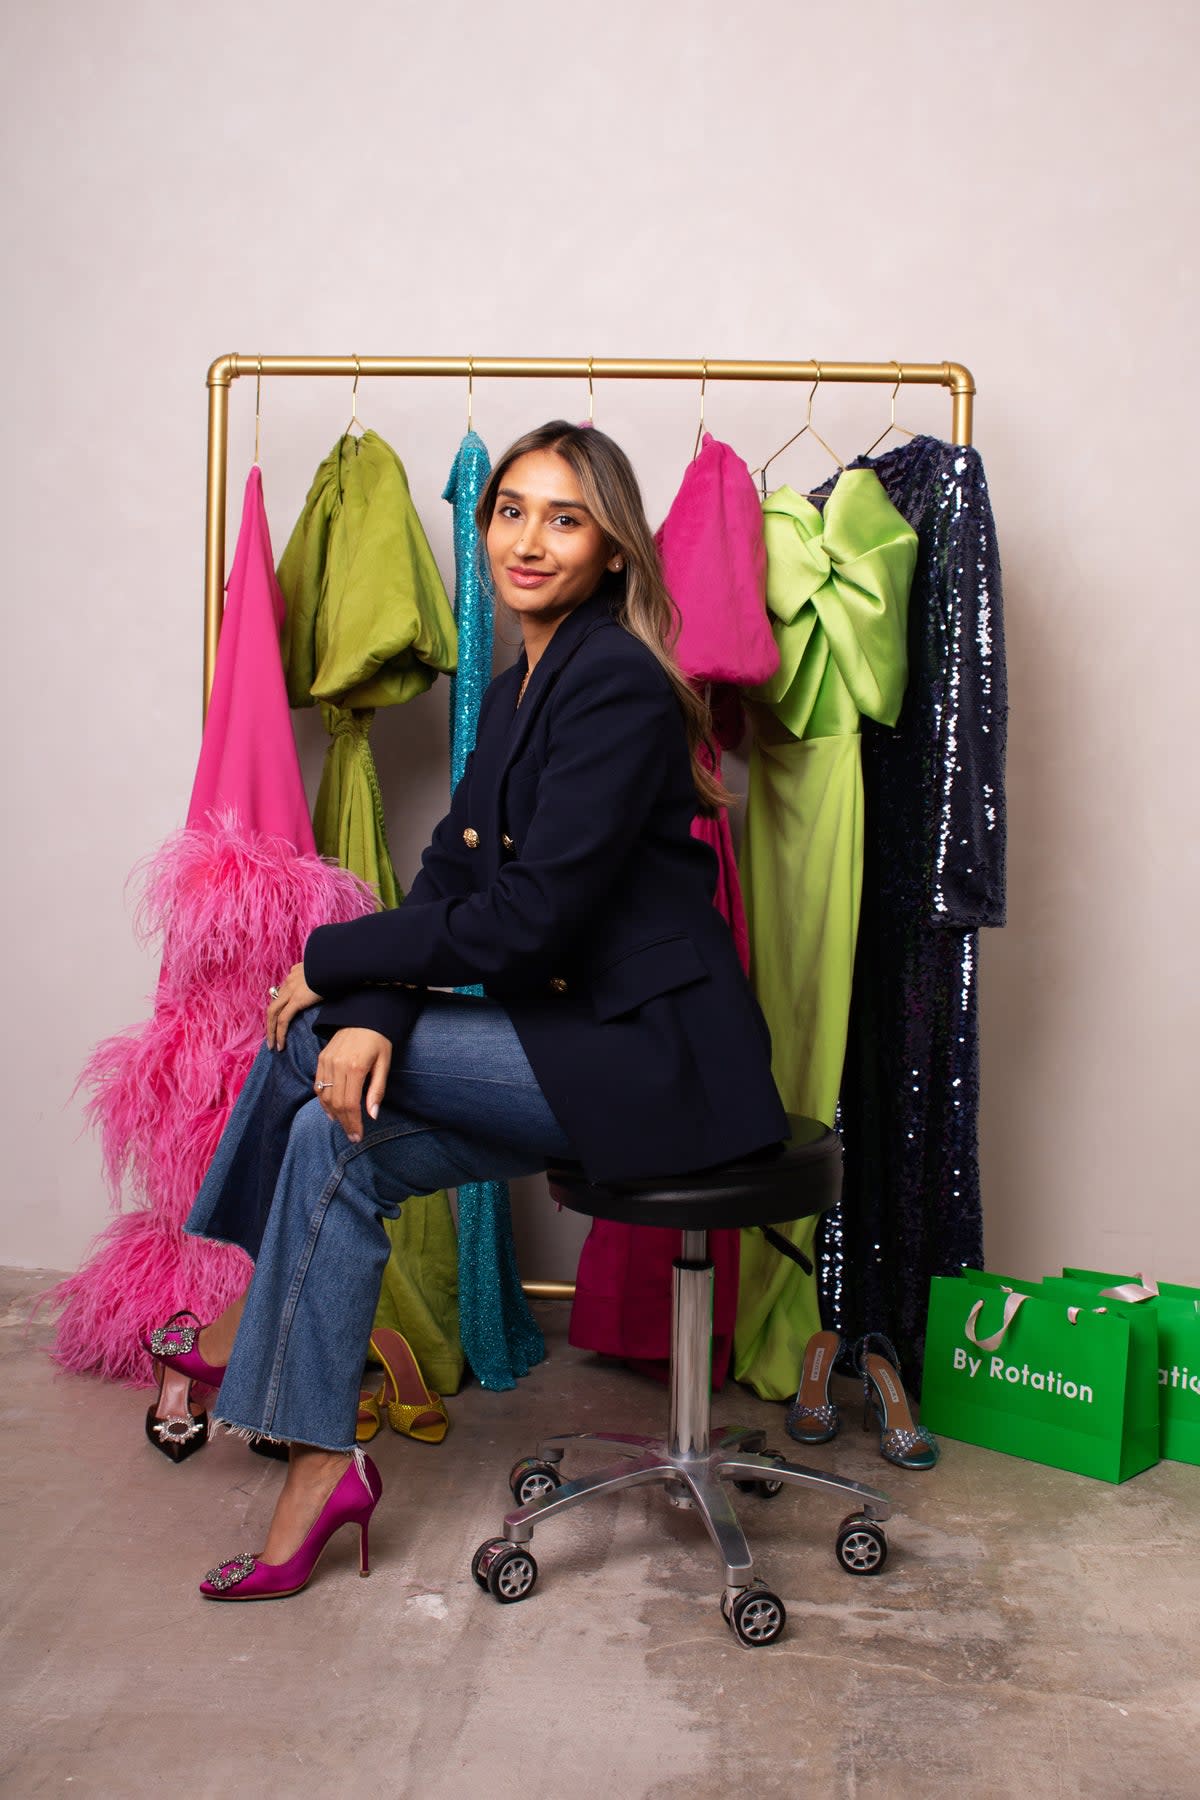 ByRotation founder Eshita shares what to rent and what to buy (By Rotation)